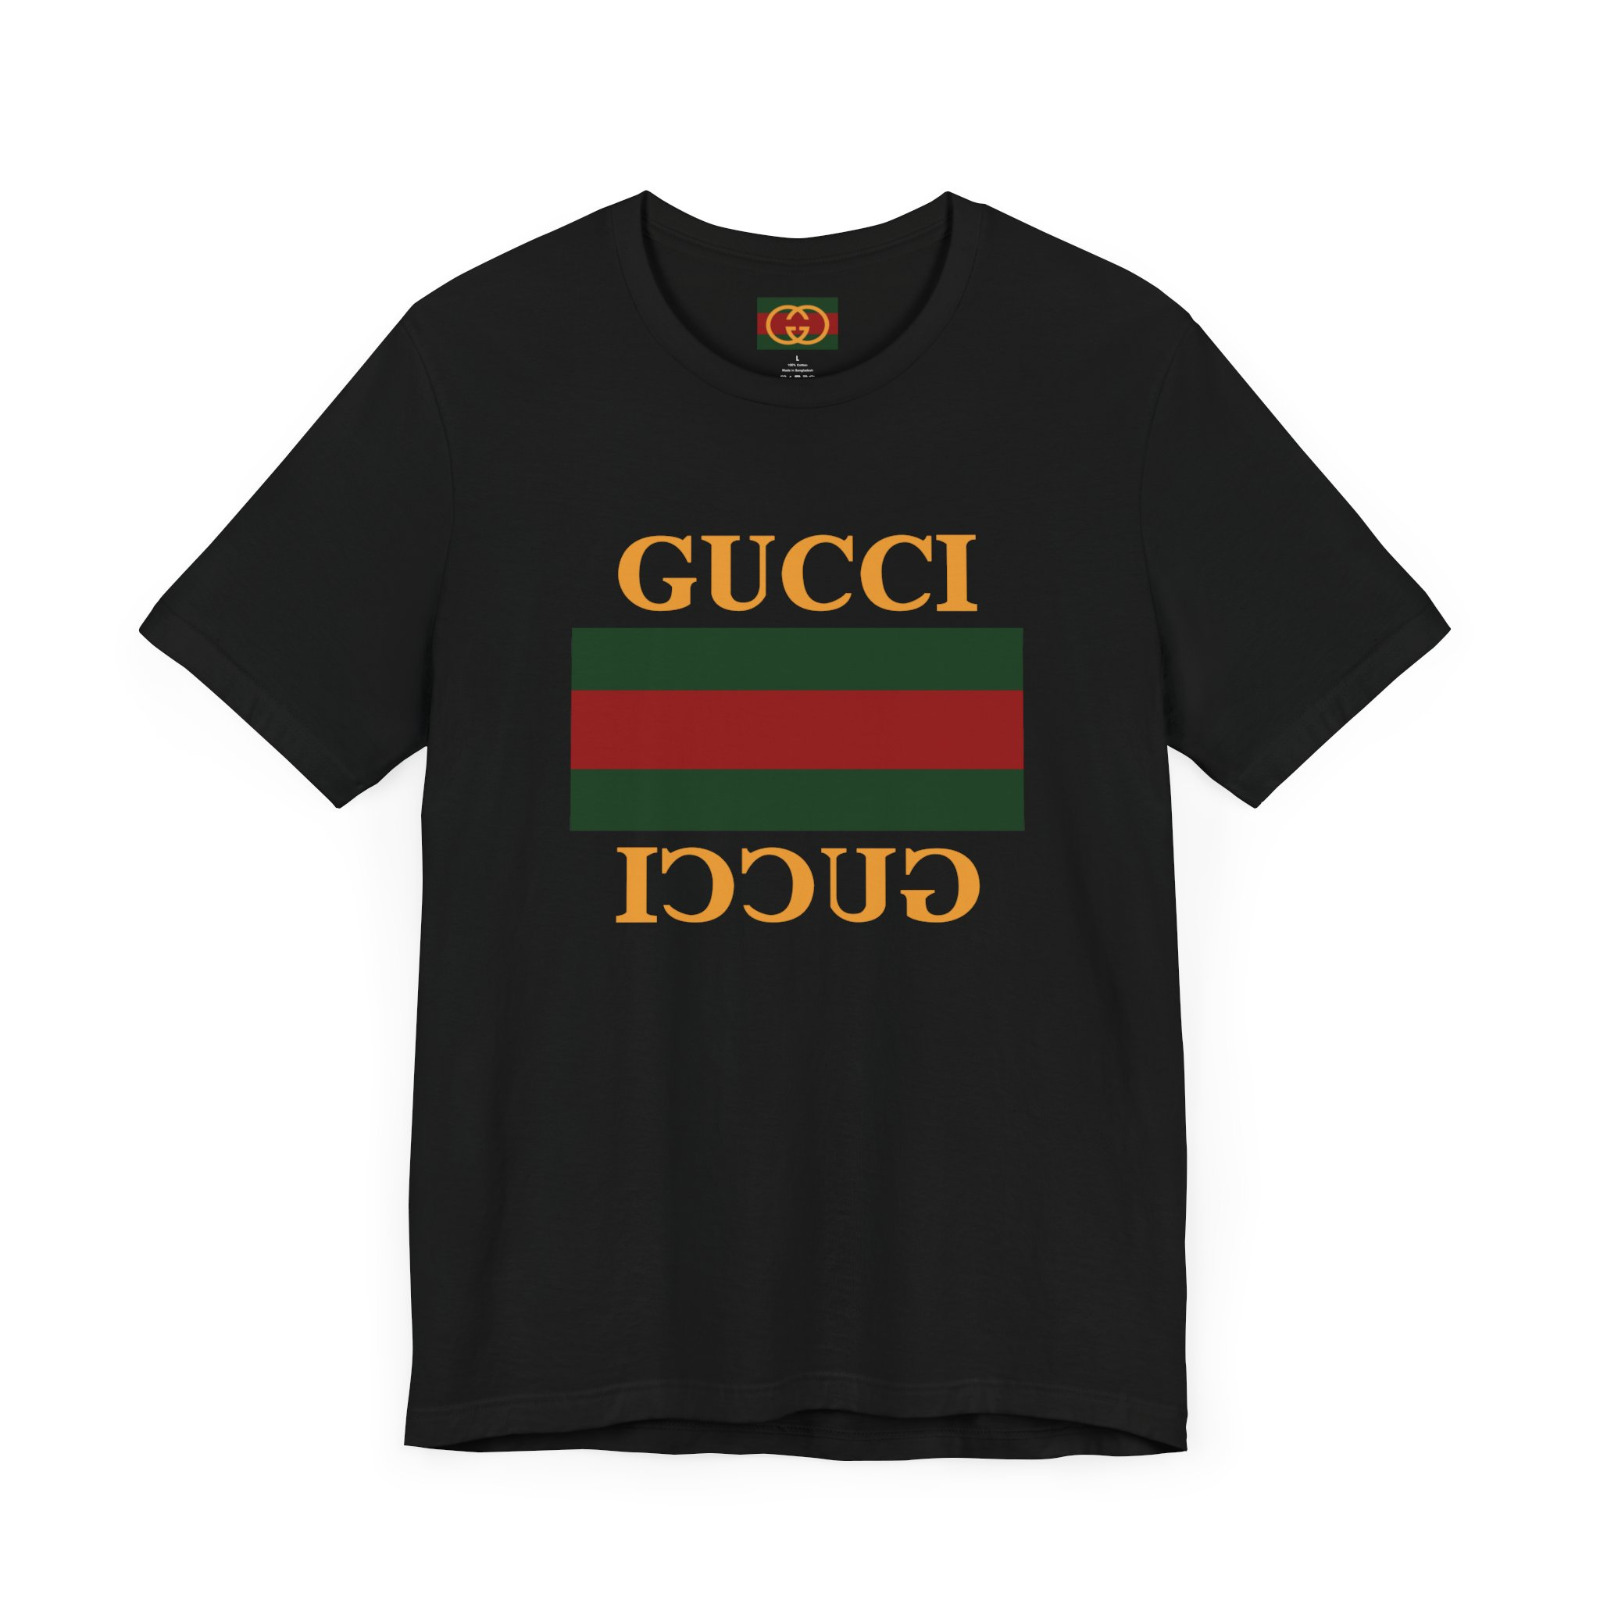 New Gucci Aunthentic Limited Edition Logo Men's T-Shirt Tee Size S-5XL USA HOT